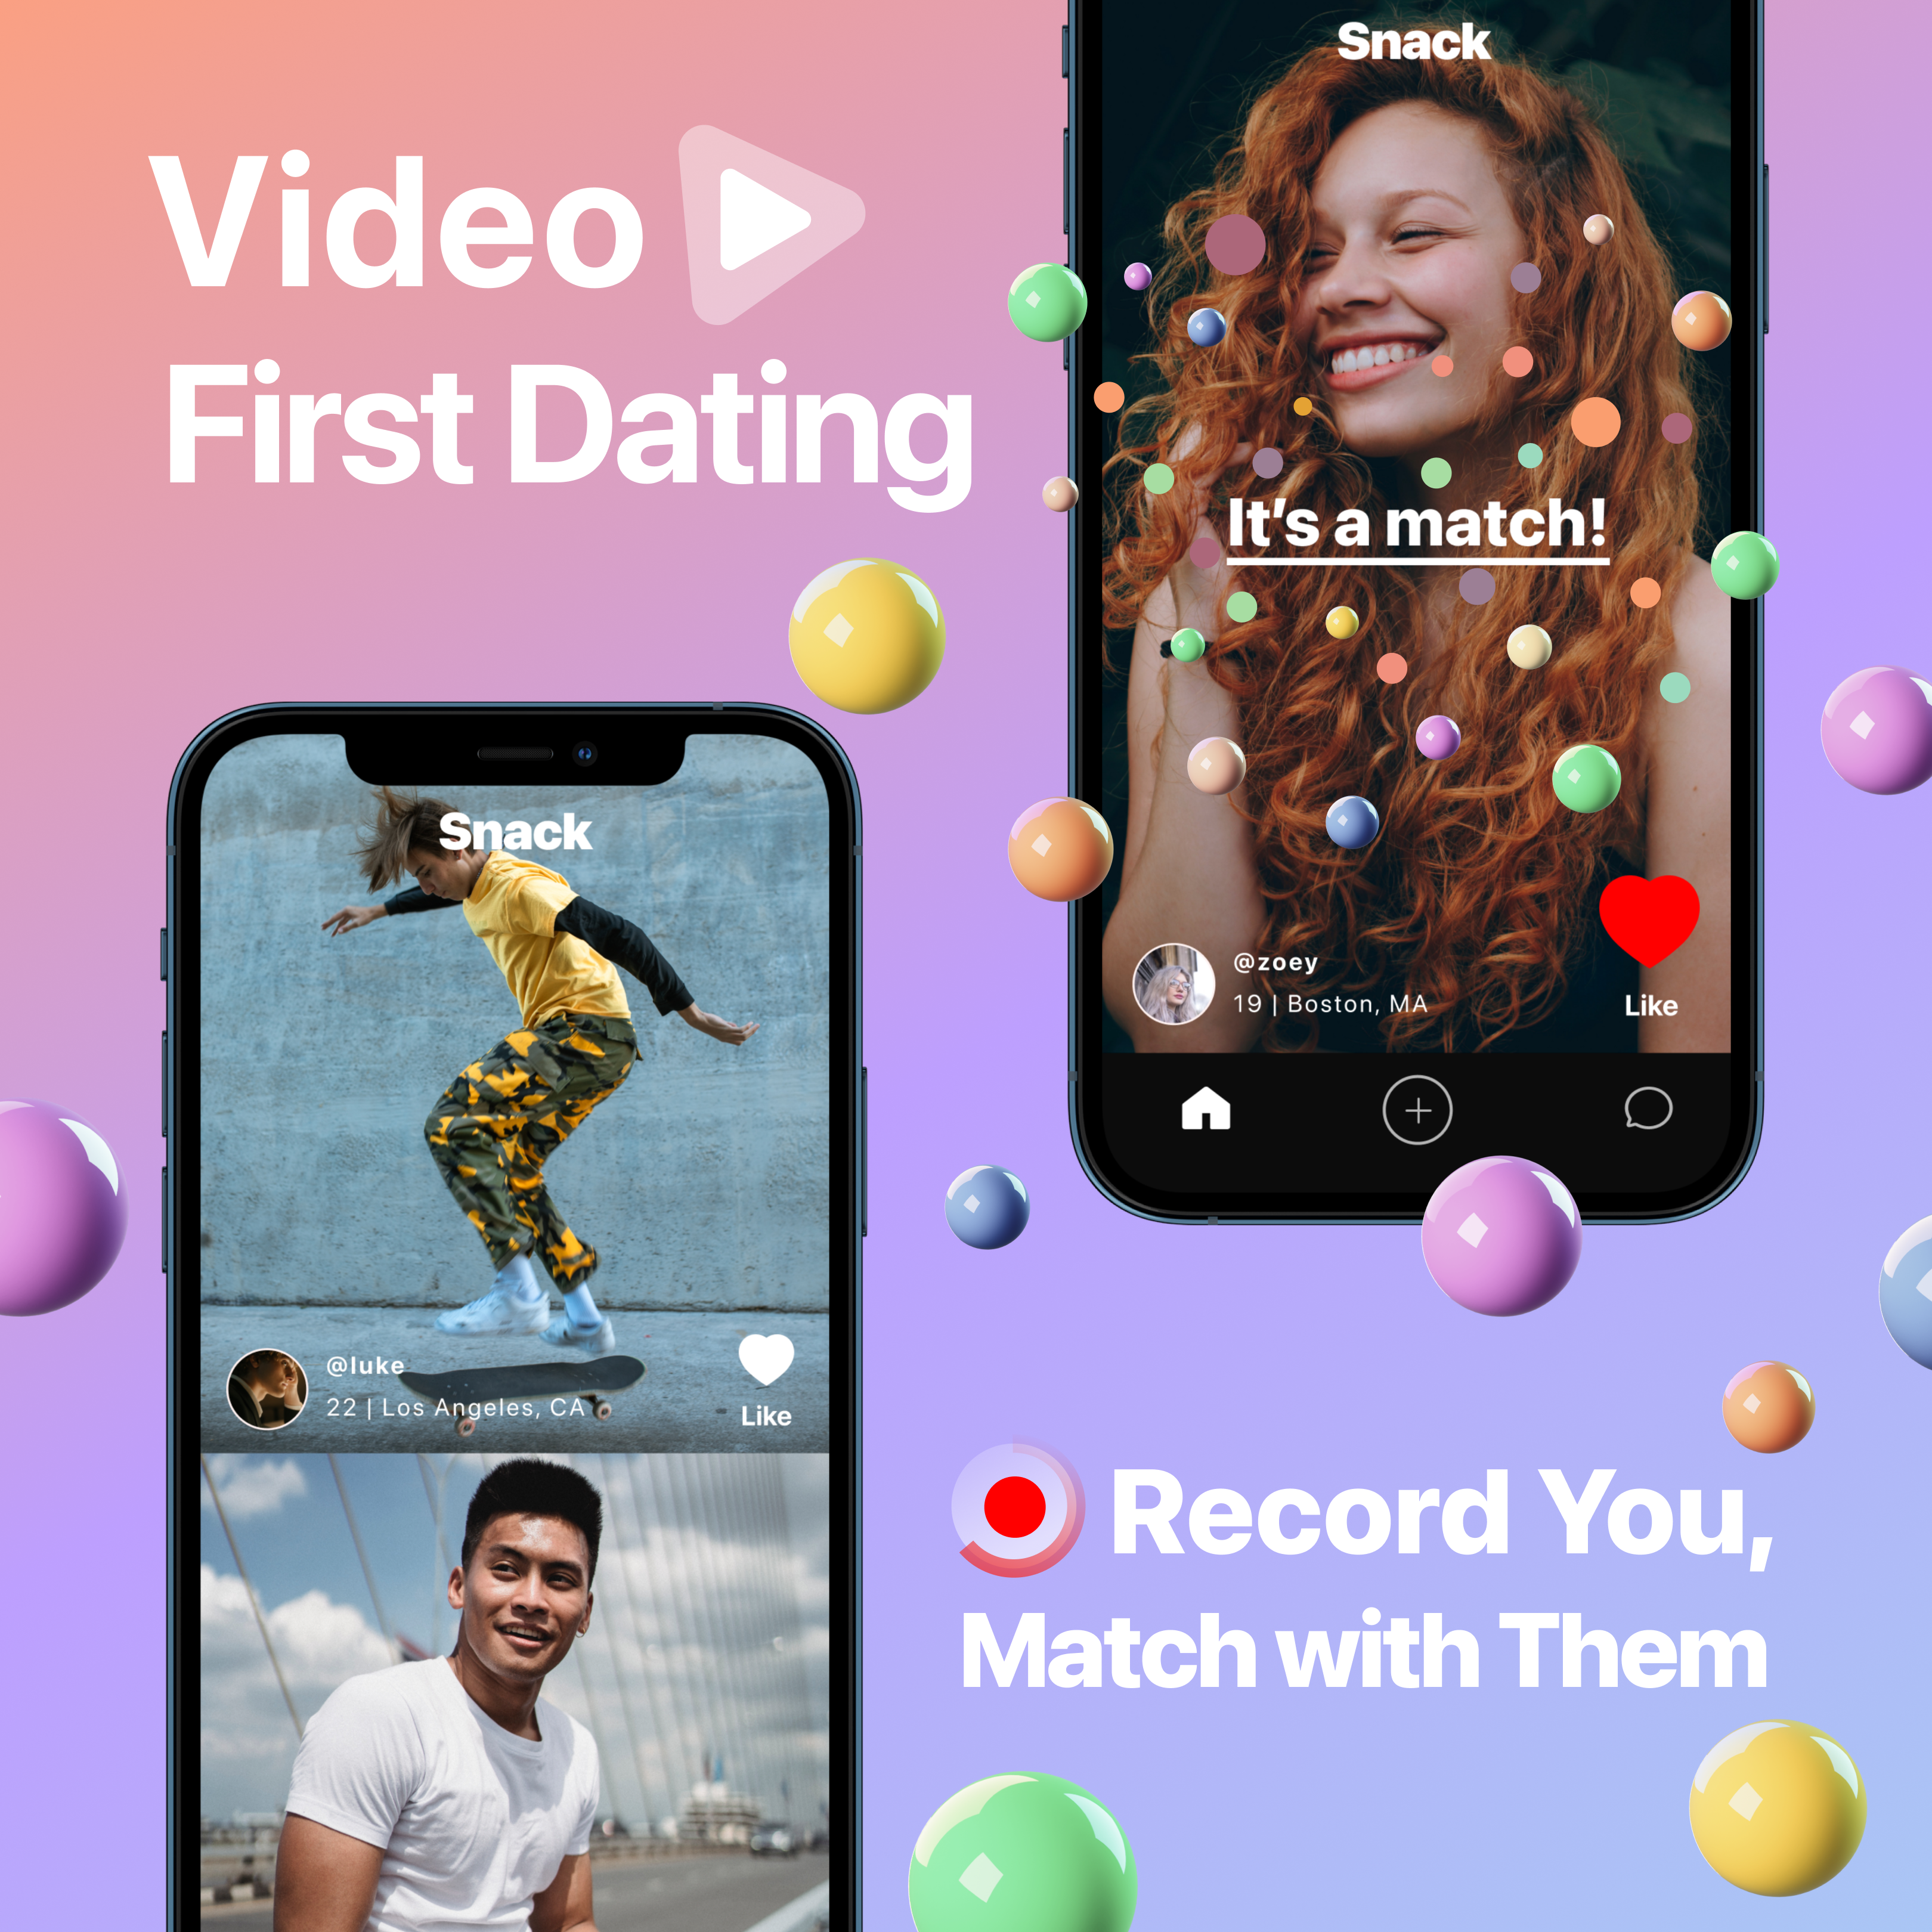 Promotional image of two phones showing a woman and a man on the Snack app. Image provided by Snack